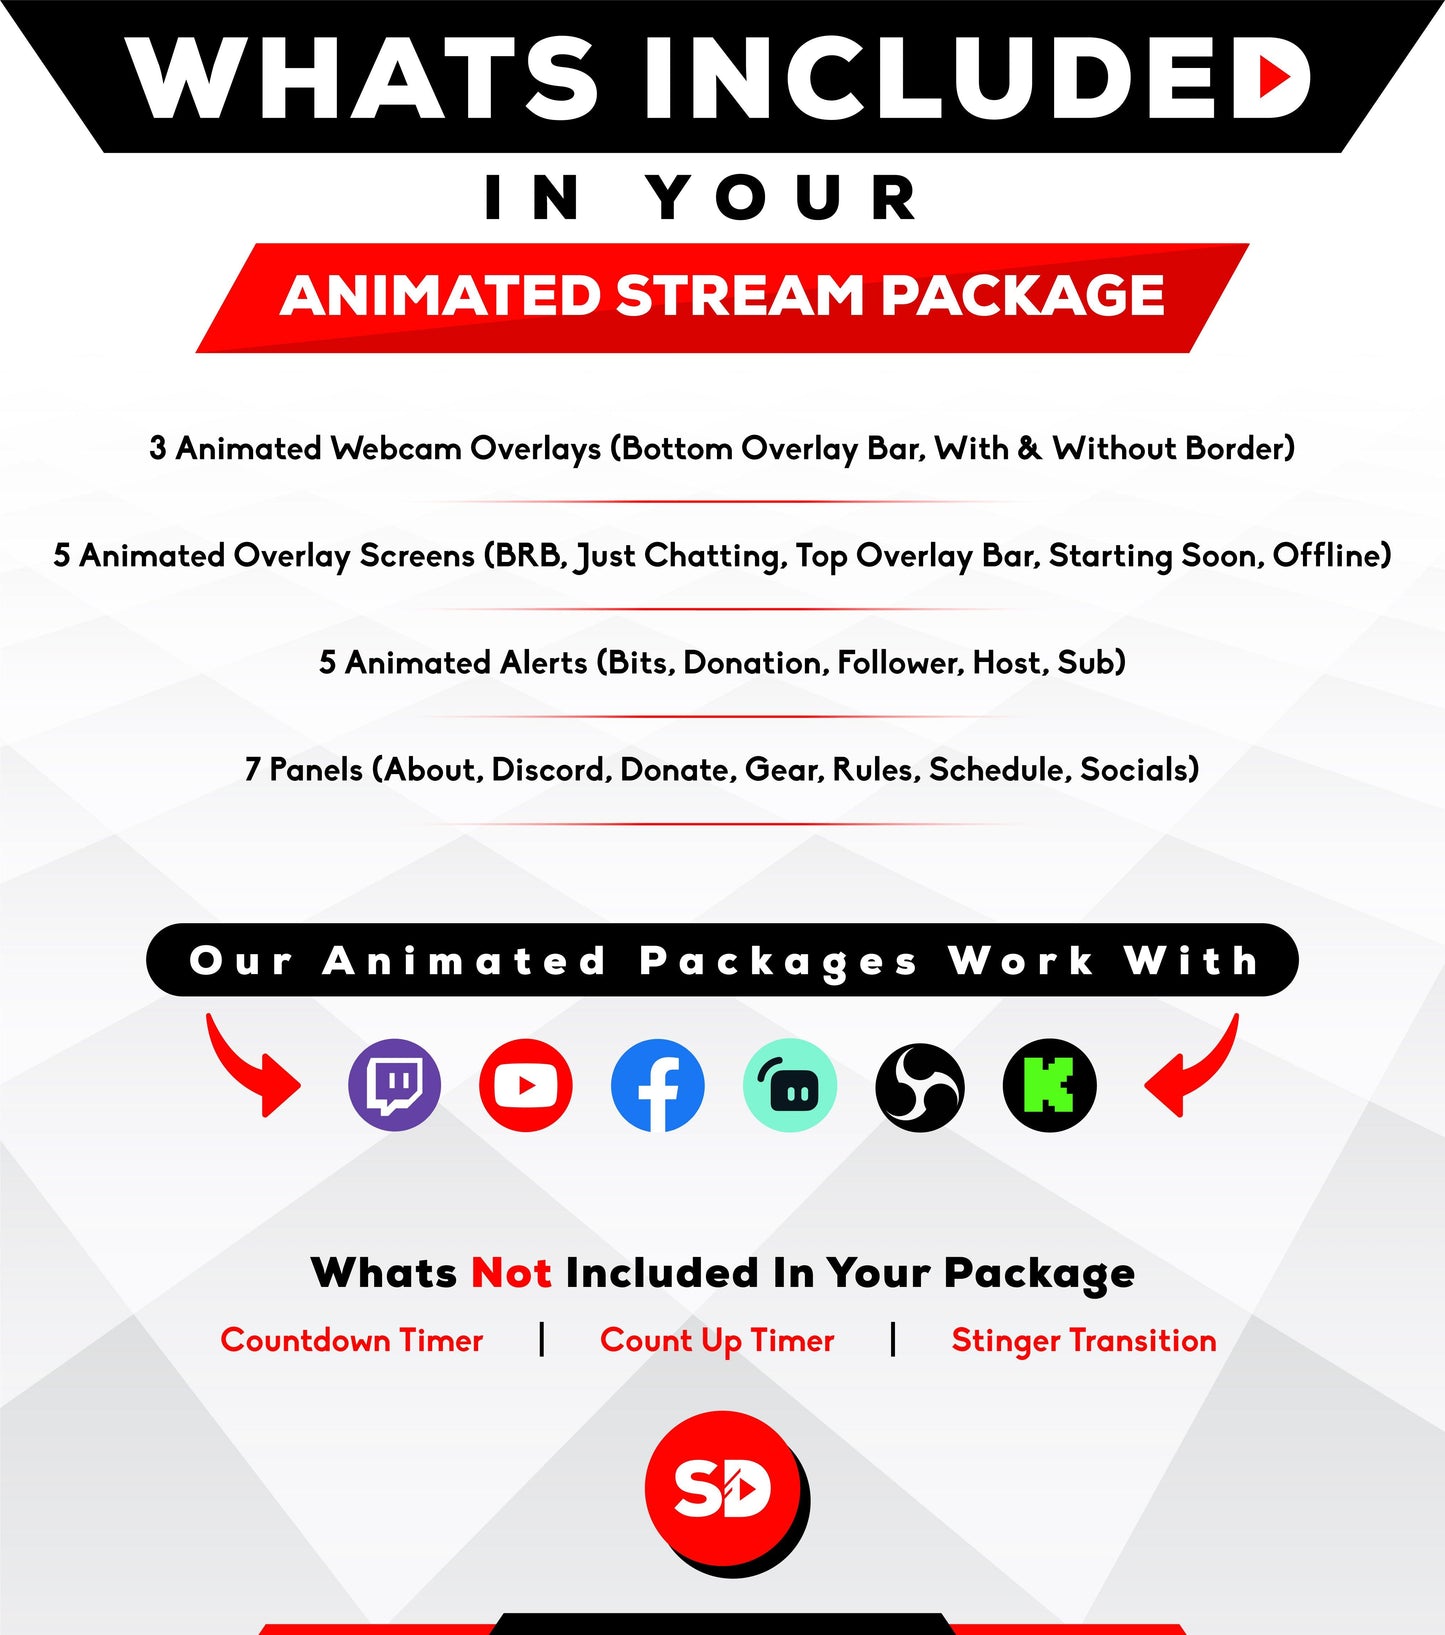 Whats included in your package illuminate stream designz